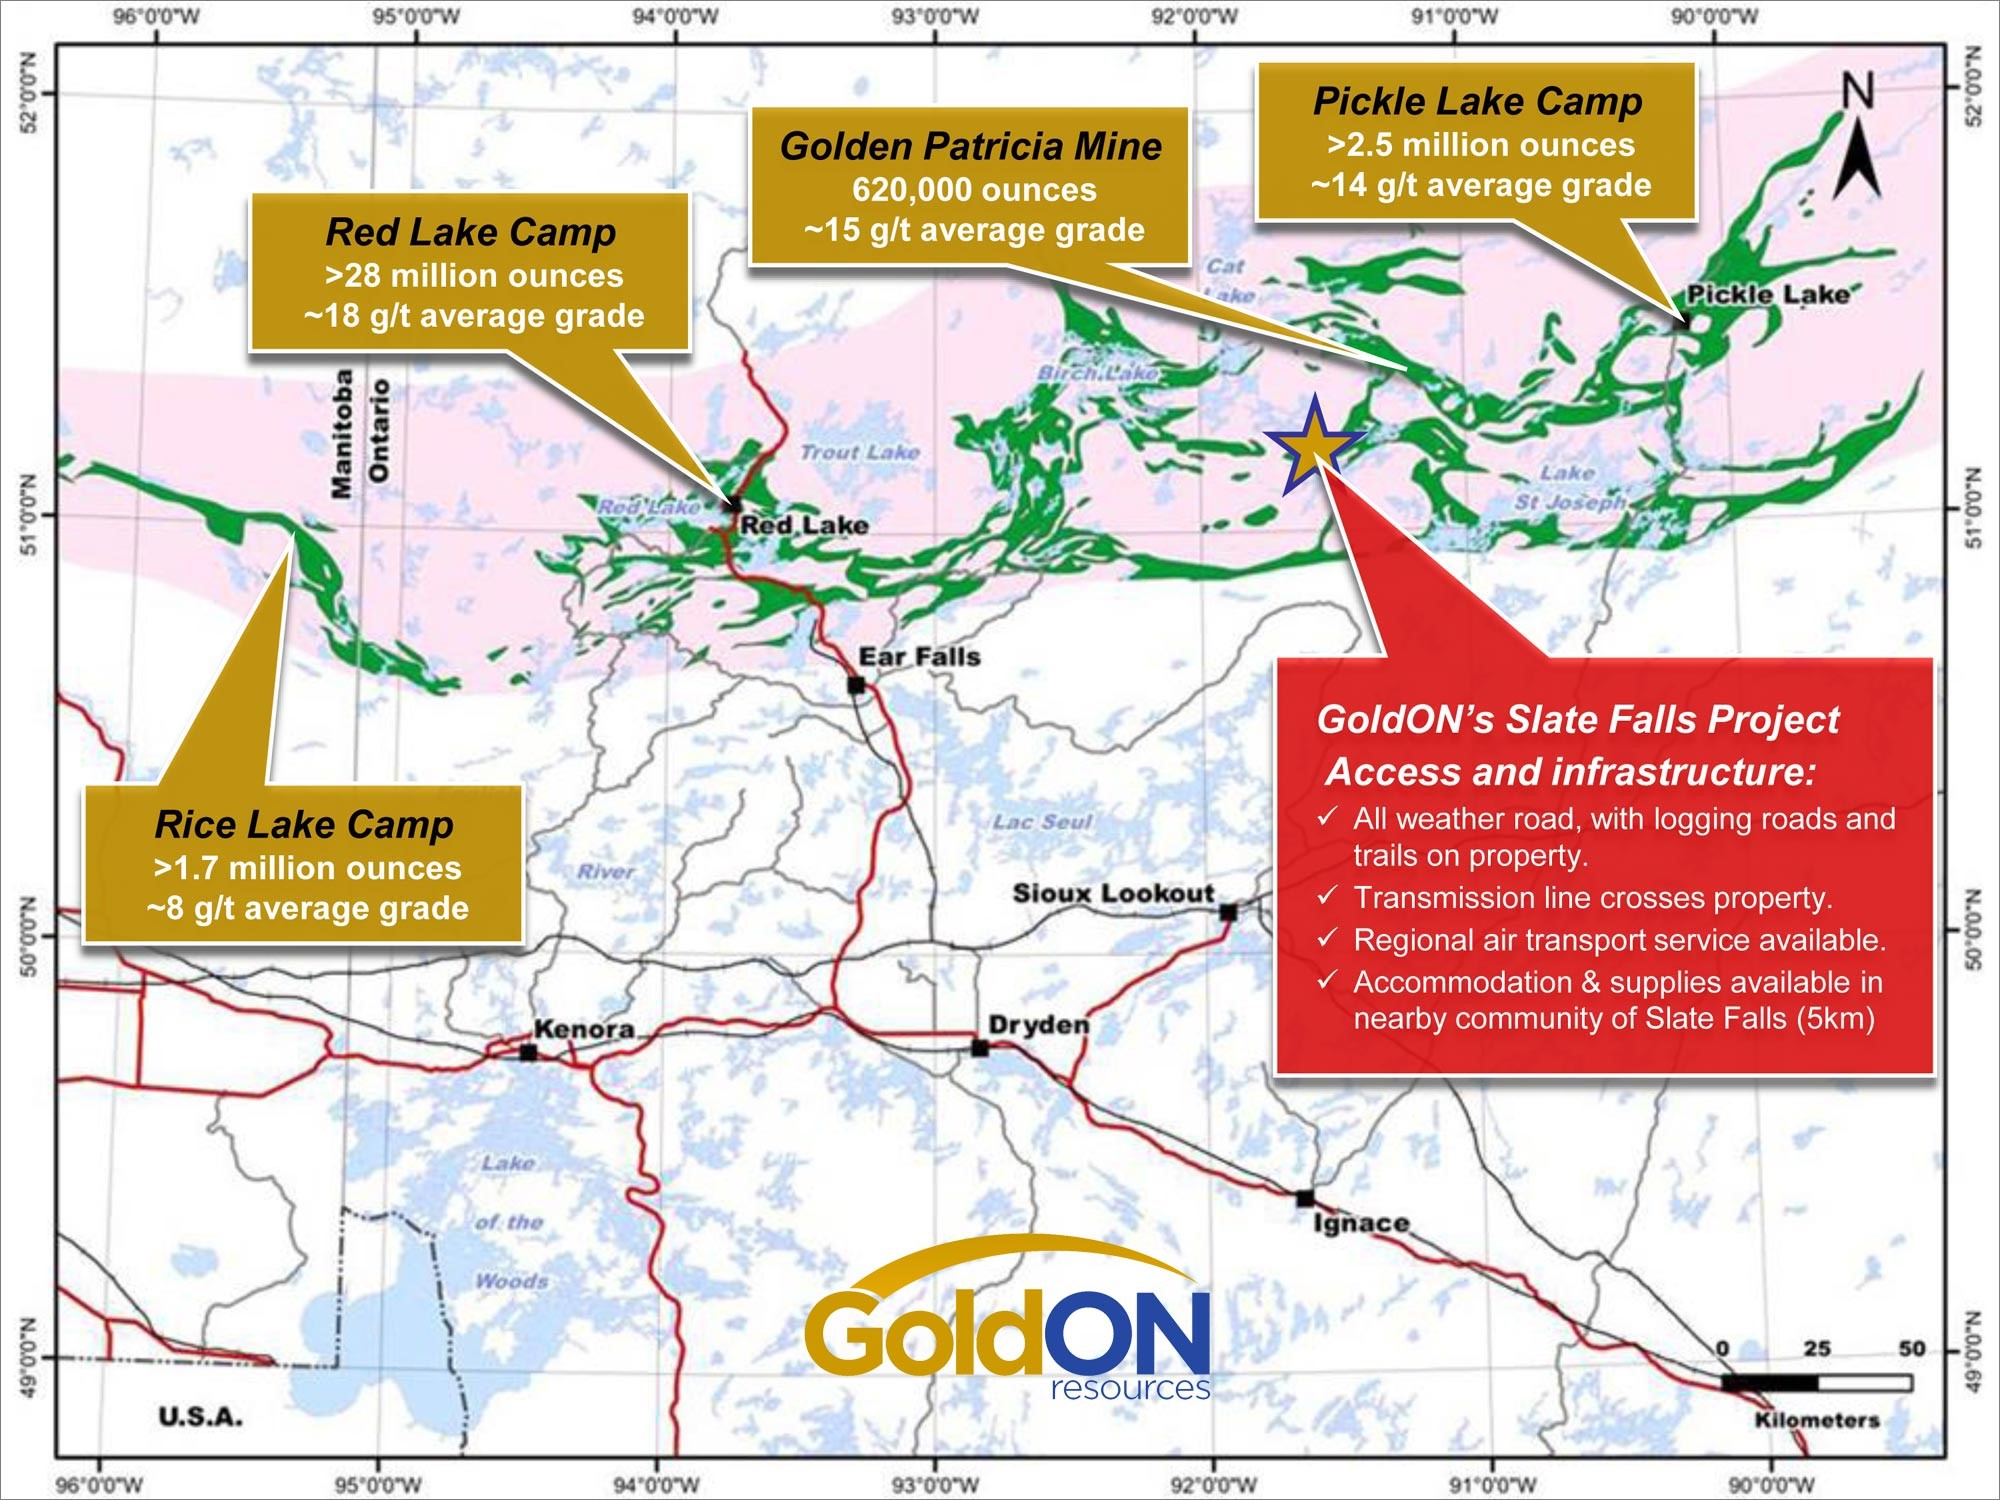 GoldON Resources Ltd., Tuesday, November 12, 2019, Press release picture